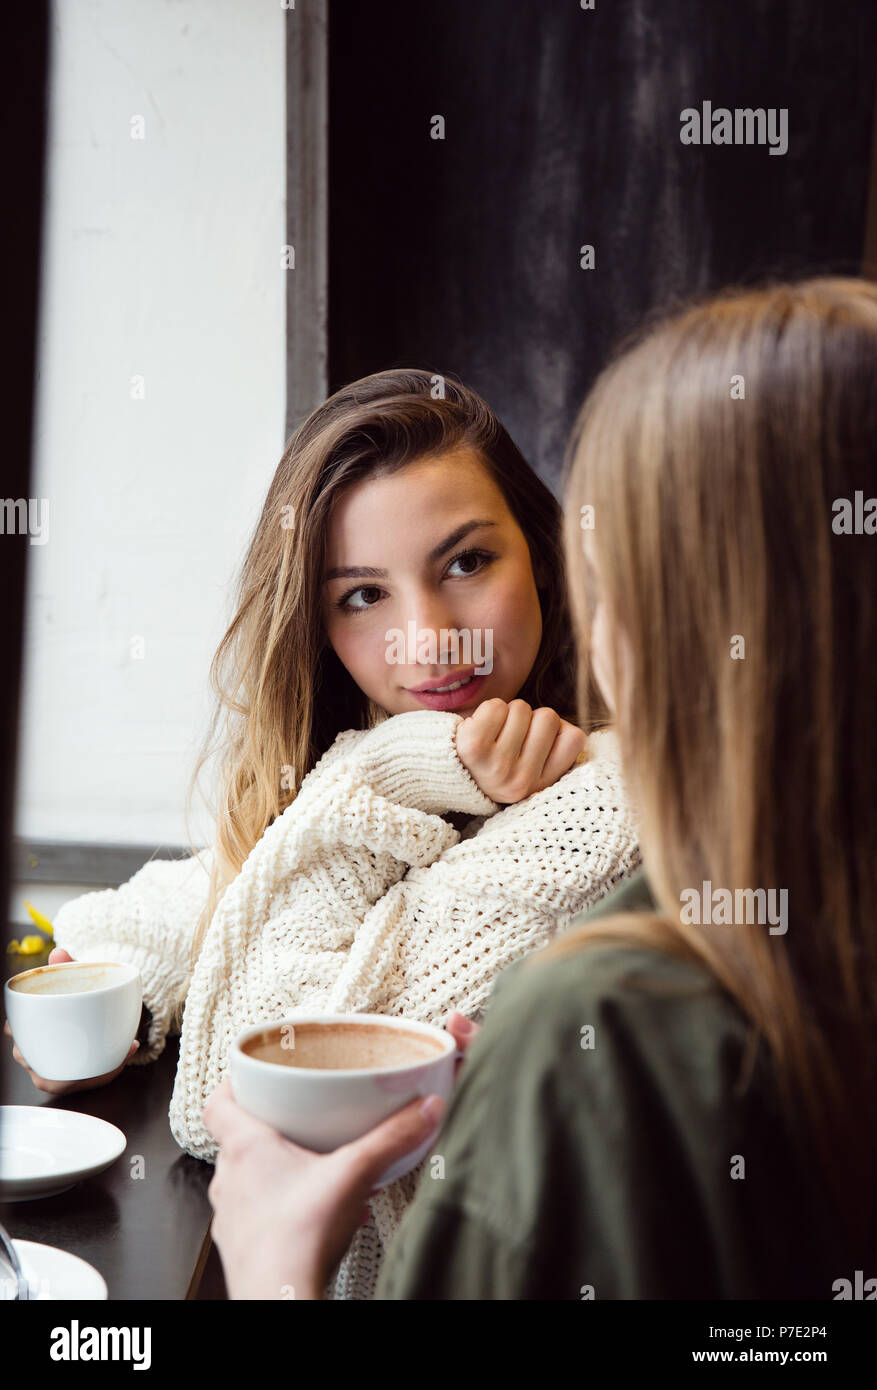 Young women chatting over coffee in cafe Stock Photo